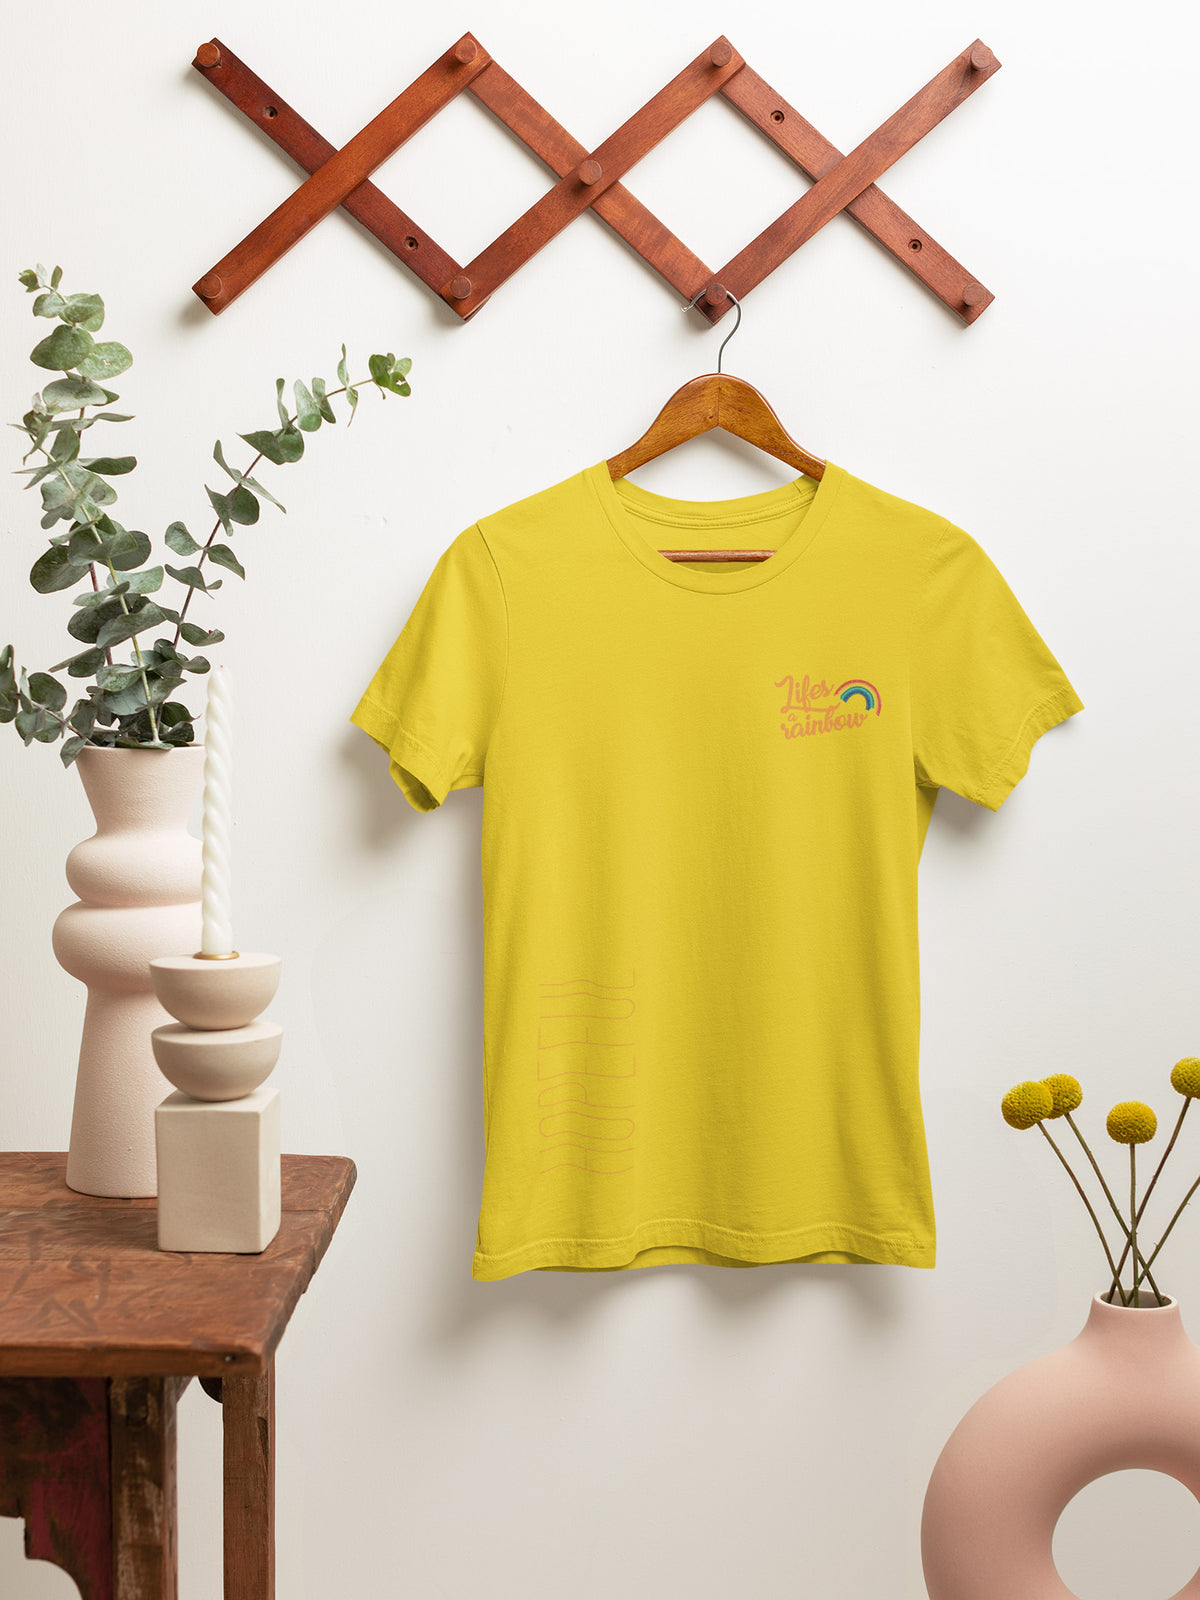 Colorful Comfort: Rainbow Theme Round Neck Cotton T-Shirt for Women - Yellow Color